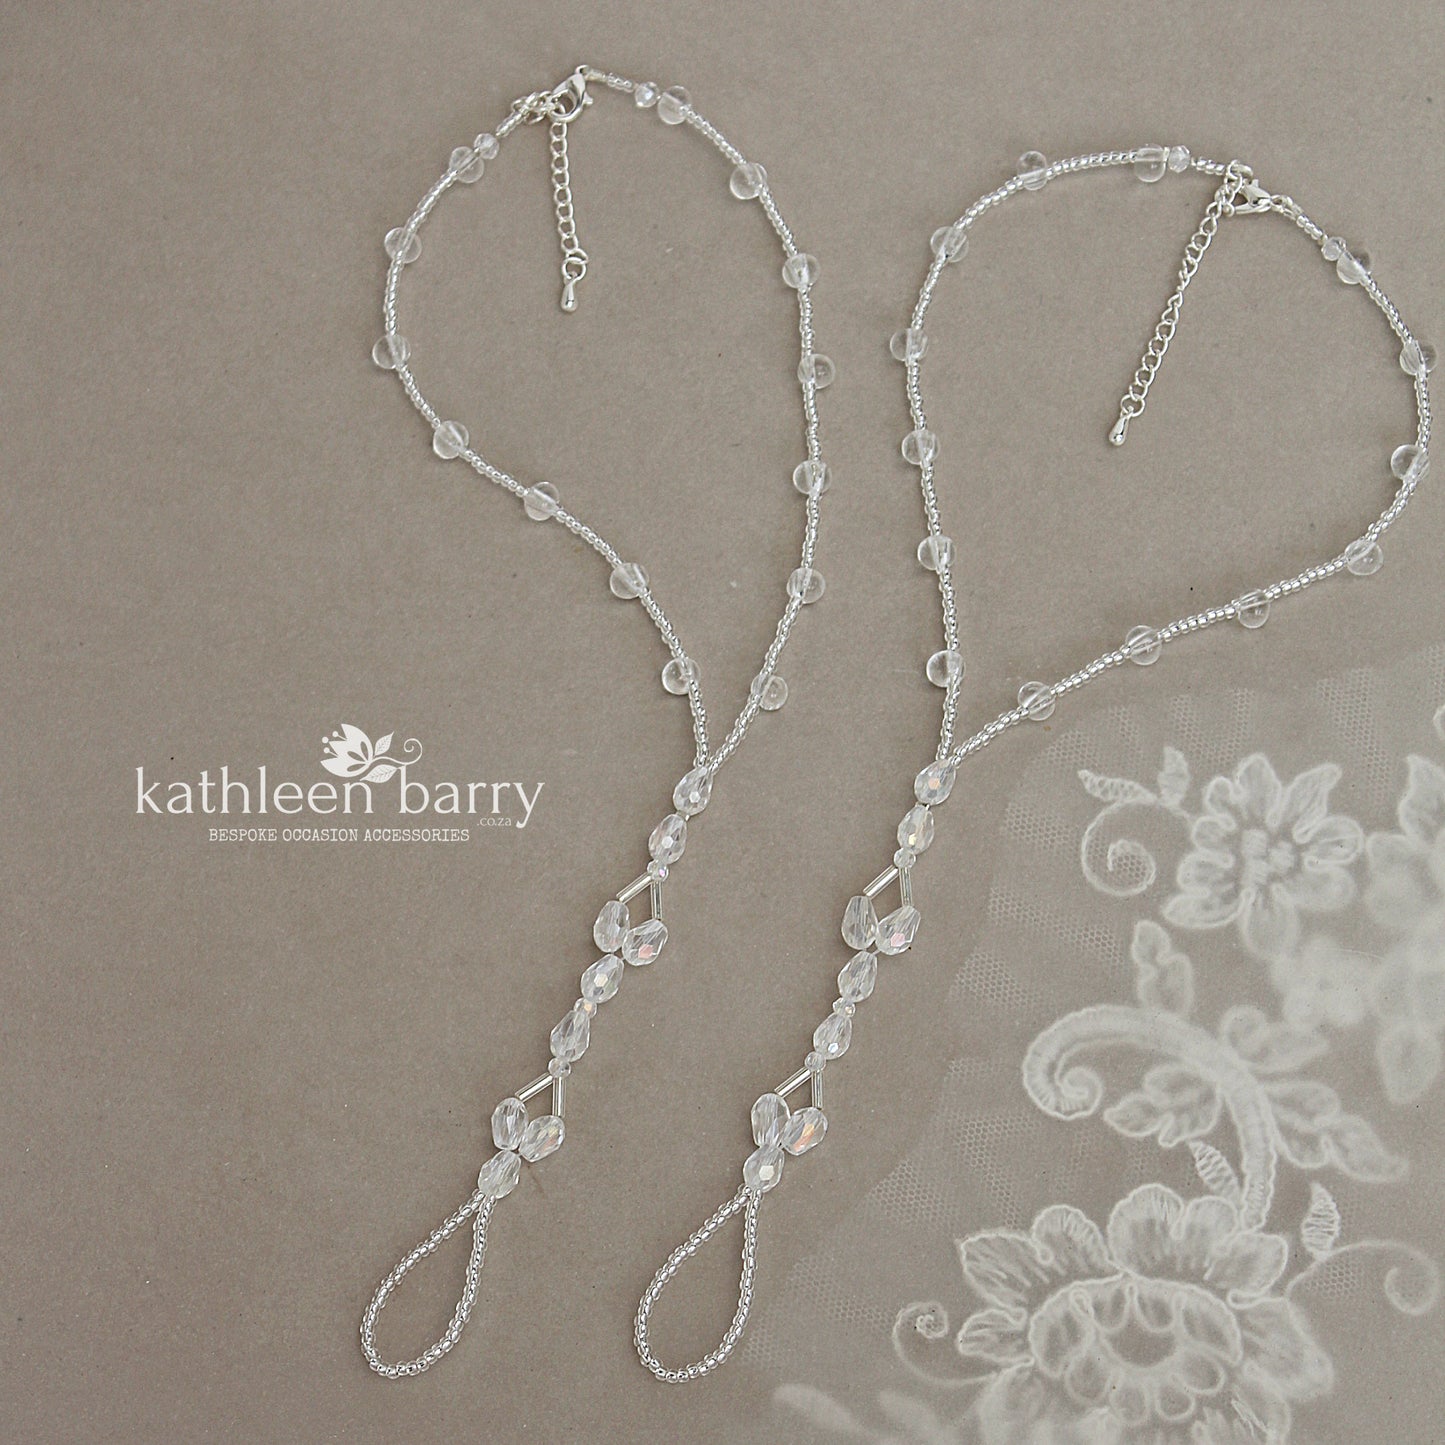 Barefoot Jewellery Sandals for Brides and bridal party - style 006 - (Pair)